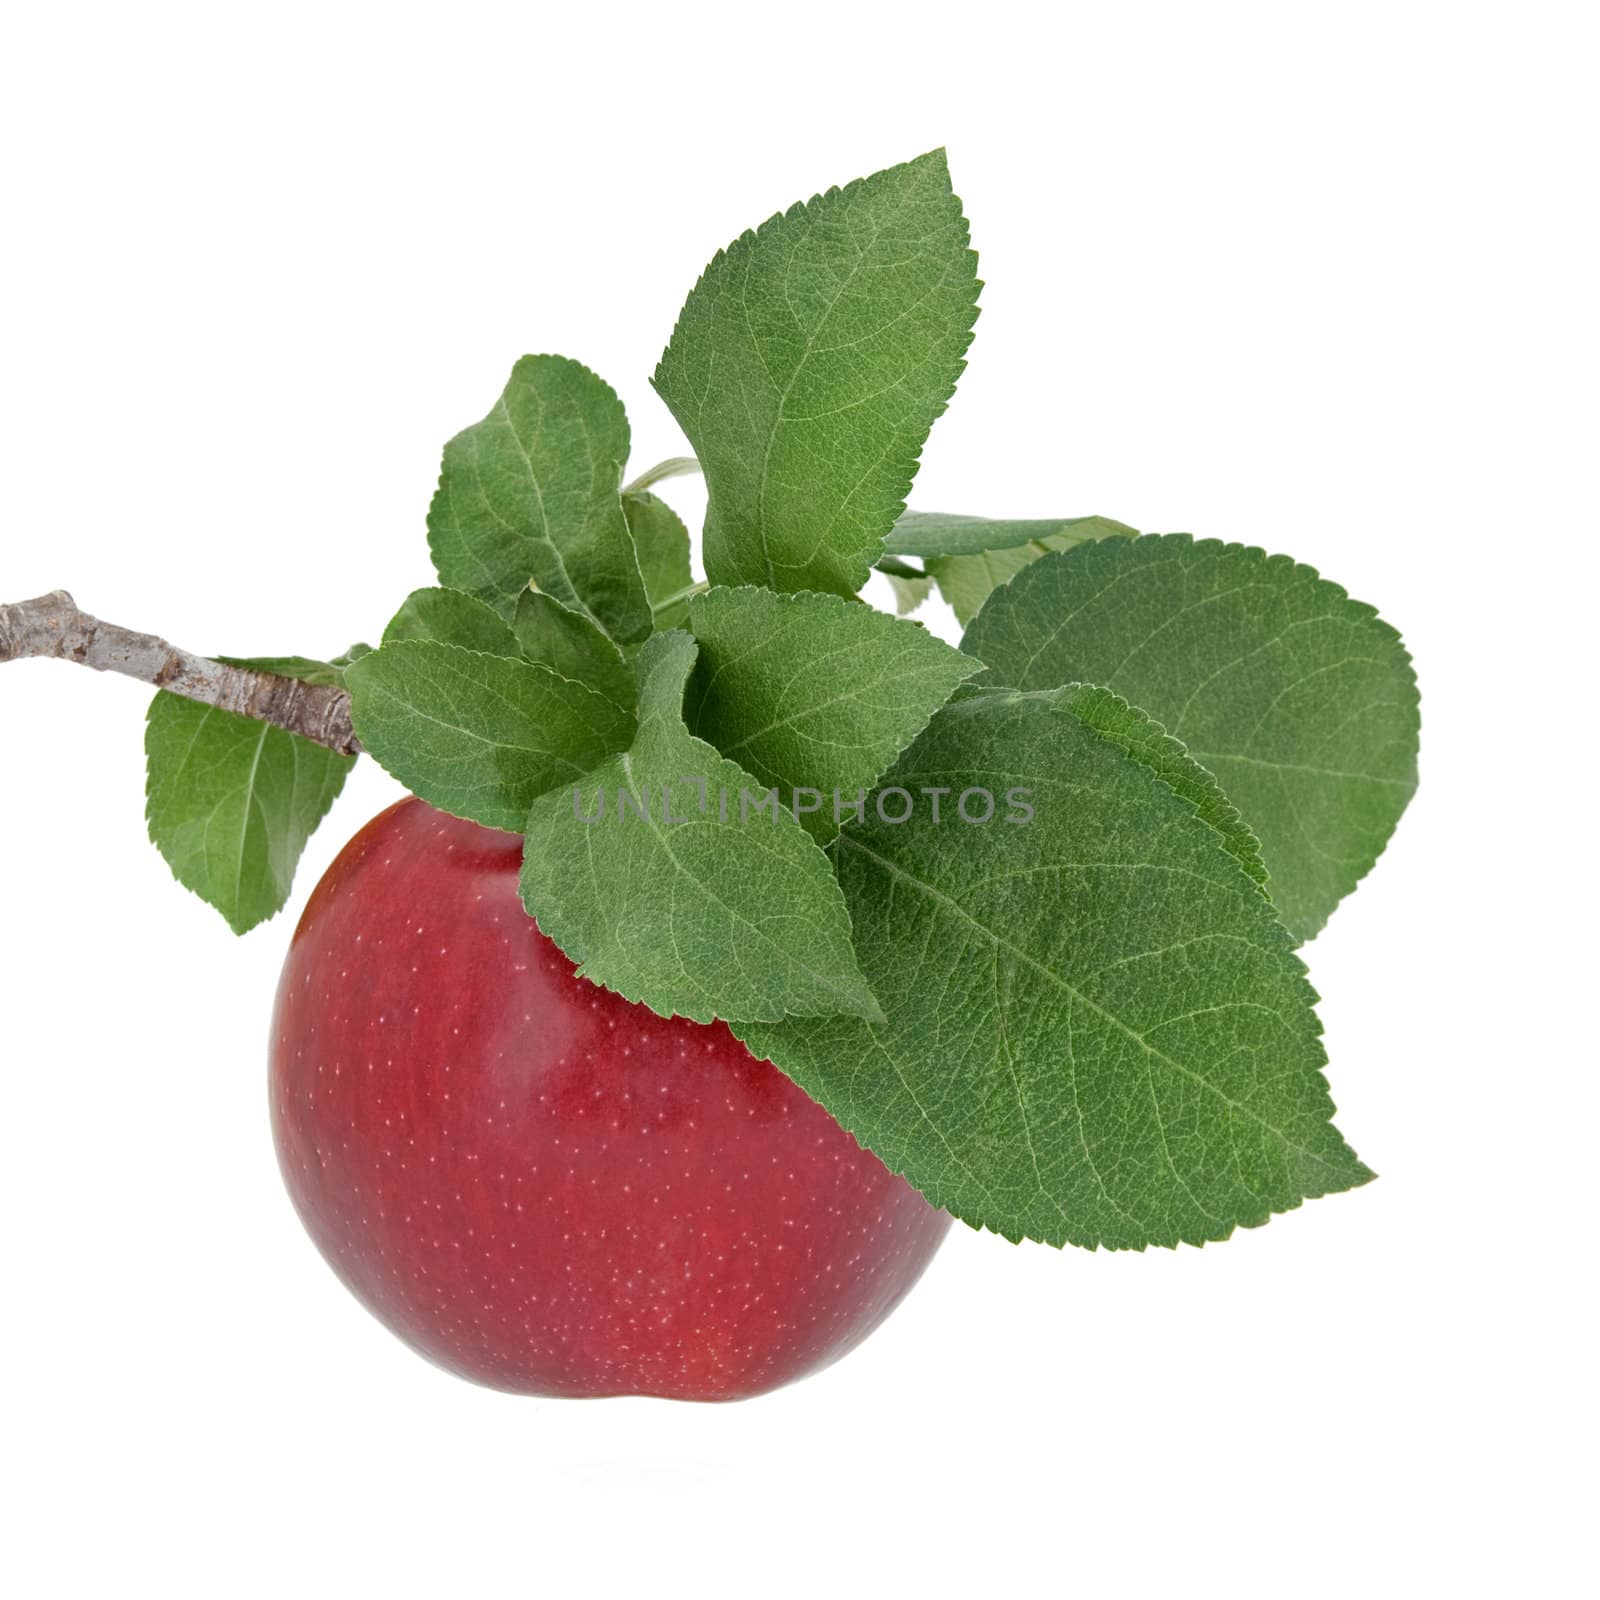 Red apple with leaves on a branch by anikasalsera